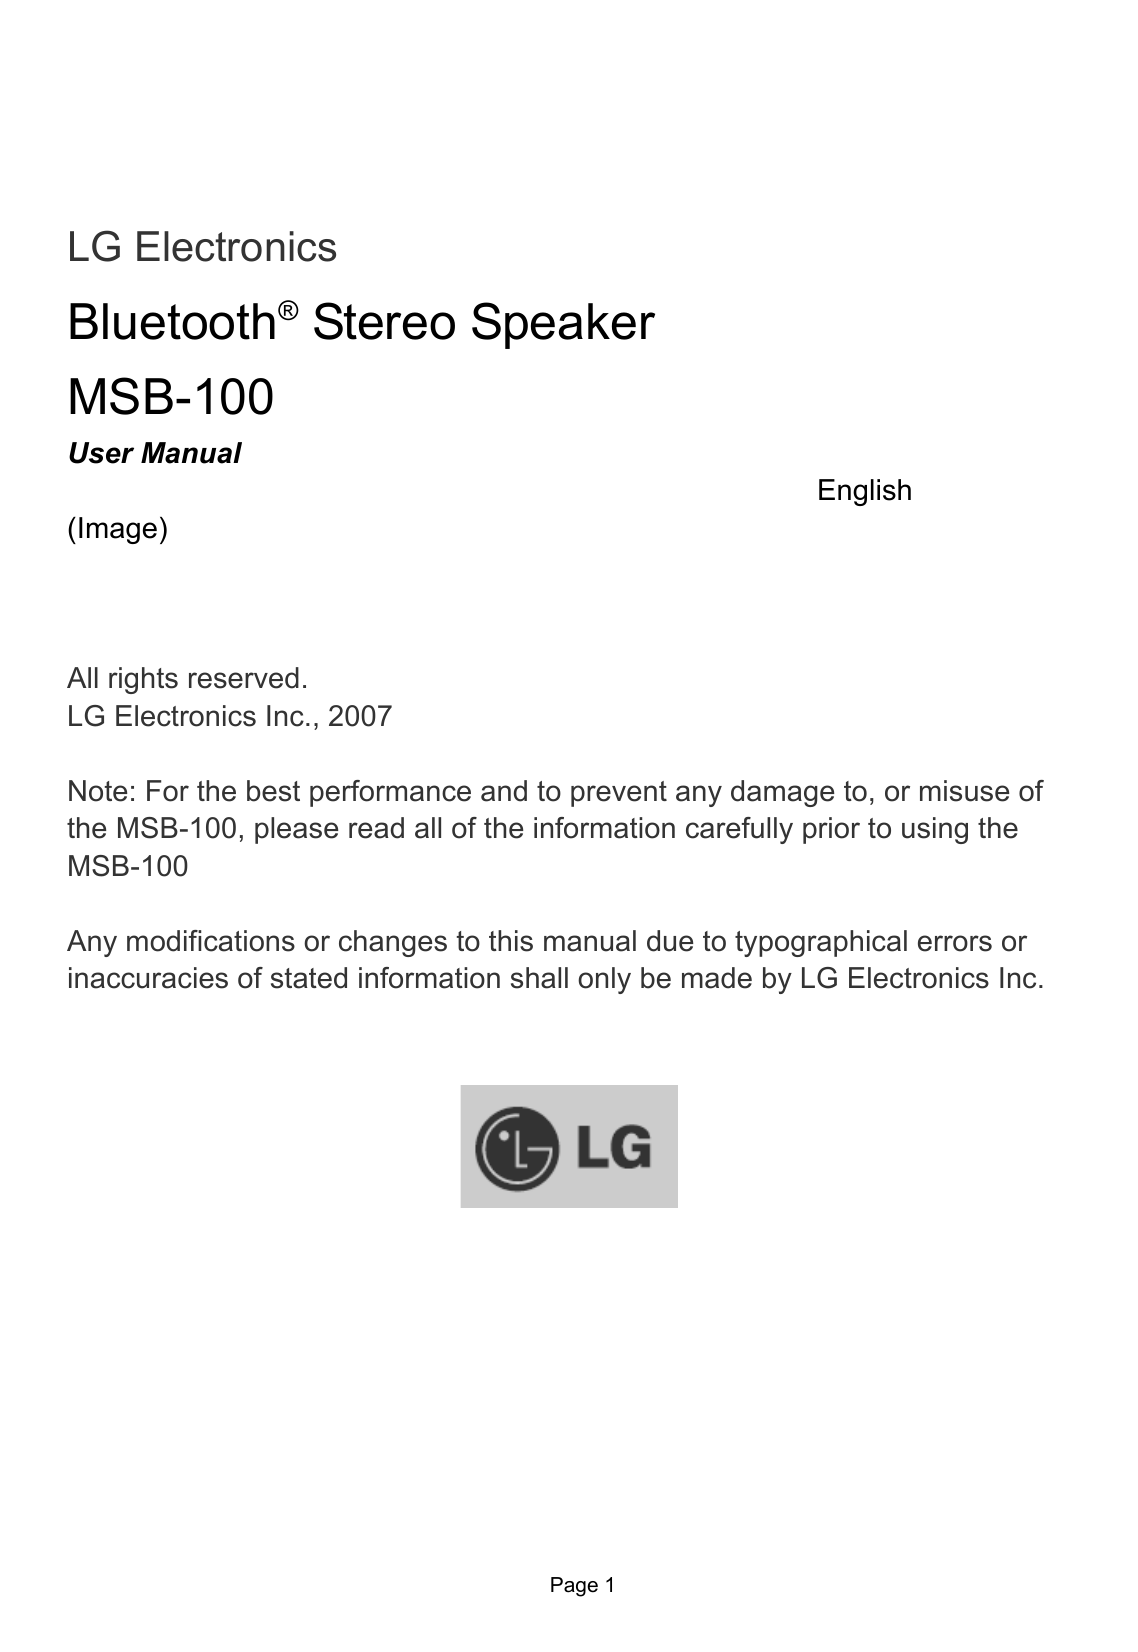                 Page 1       LG Electronics Bluetooth® Stereo Speaker MSB-100 User Manual   English (Image)    All rights reserved. LG Electronics Inc., 2007  Note: For the best performance and to prevent any damage to, or misuse of the MSB-100, please read all of the information carefully prior to using the MSB-100  Any modifications or changes to this manual due to typographical errors or inaccuracies of stated information shall only be made by LG Electronics Inc.    